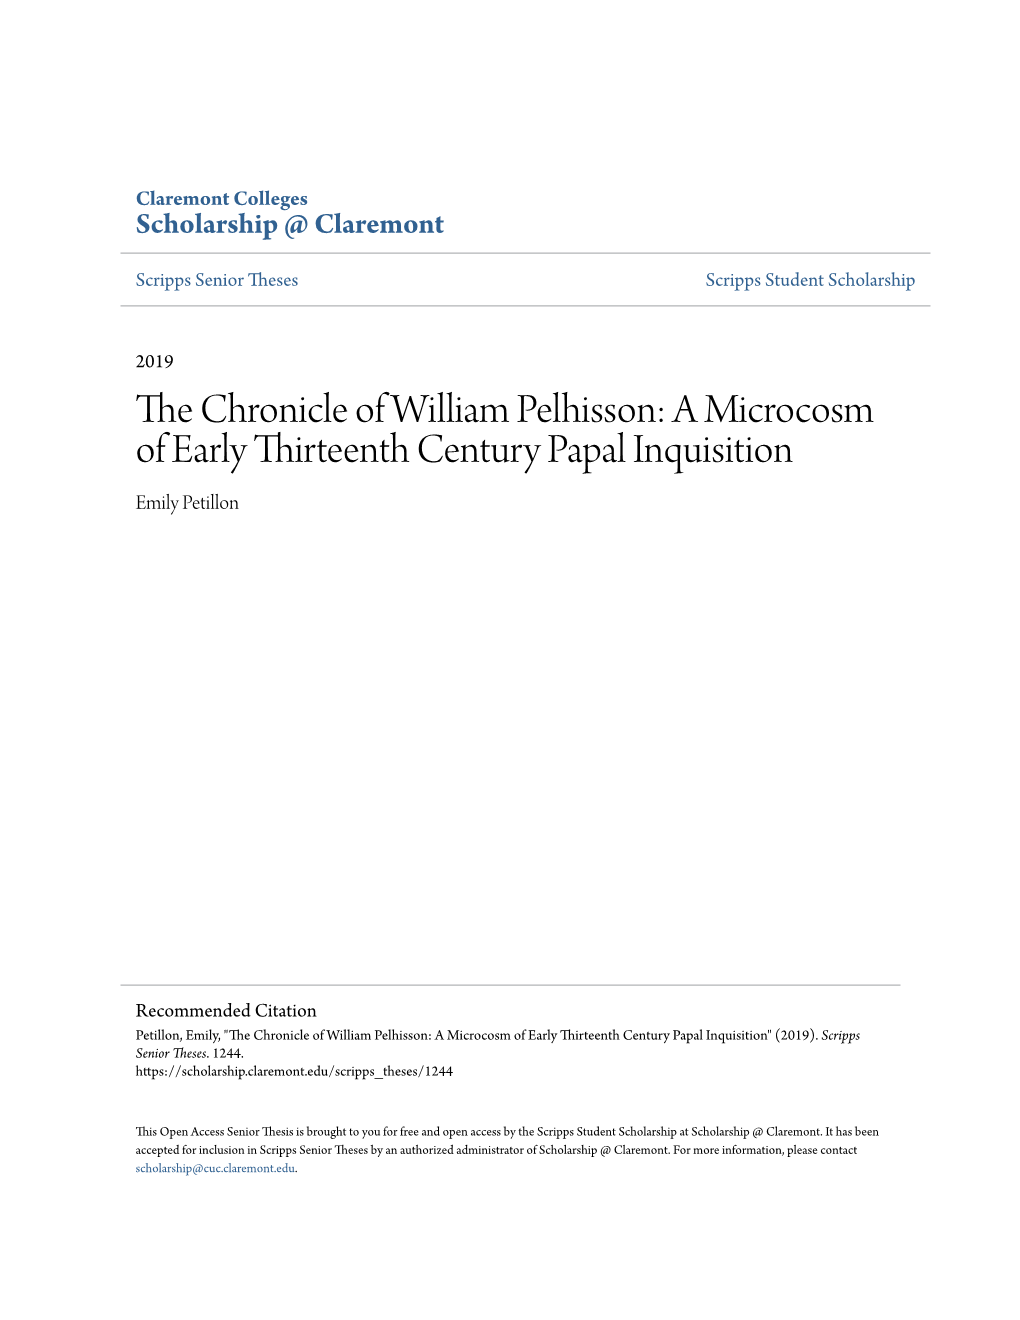 The Chronicle of William Pelhisson: a Microcosm of Early Thirteenth Century Papal Inquisition